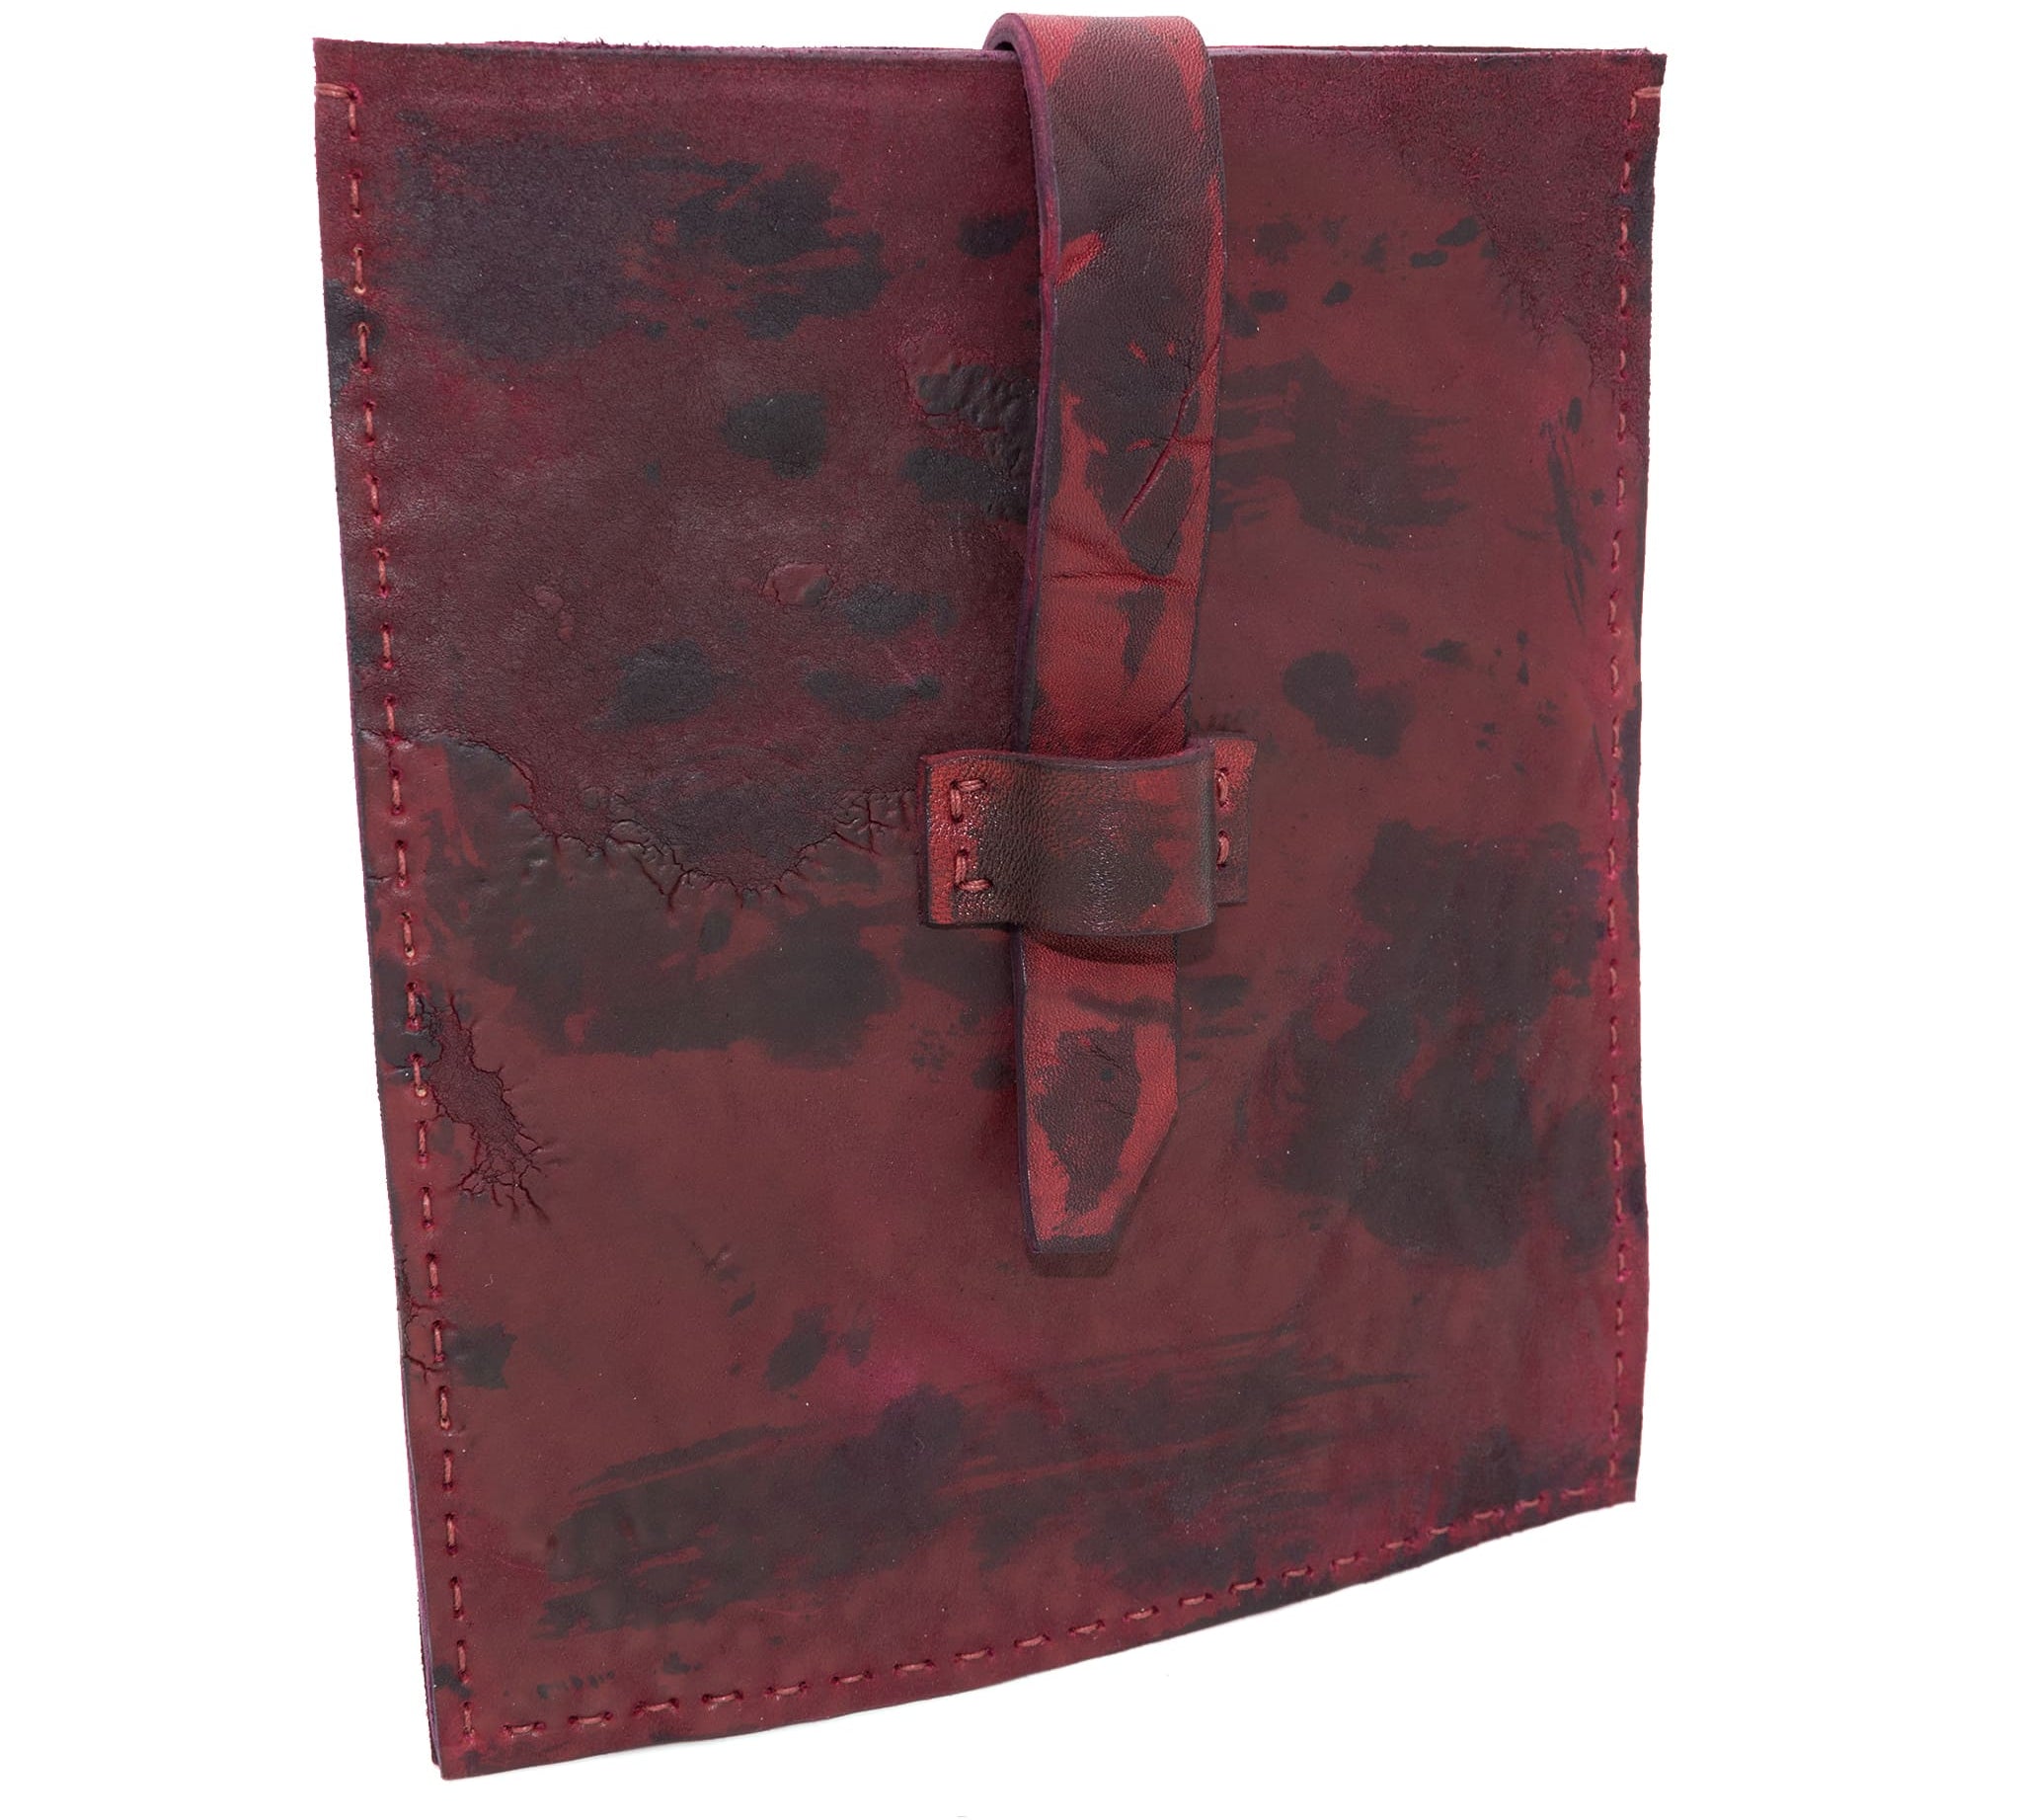 hand dyed blood red horse leather ebook pochette with a strap closure and hand stitched available to buy online at atelierskn.com